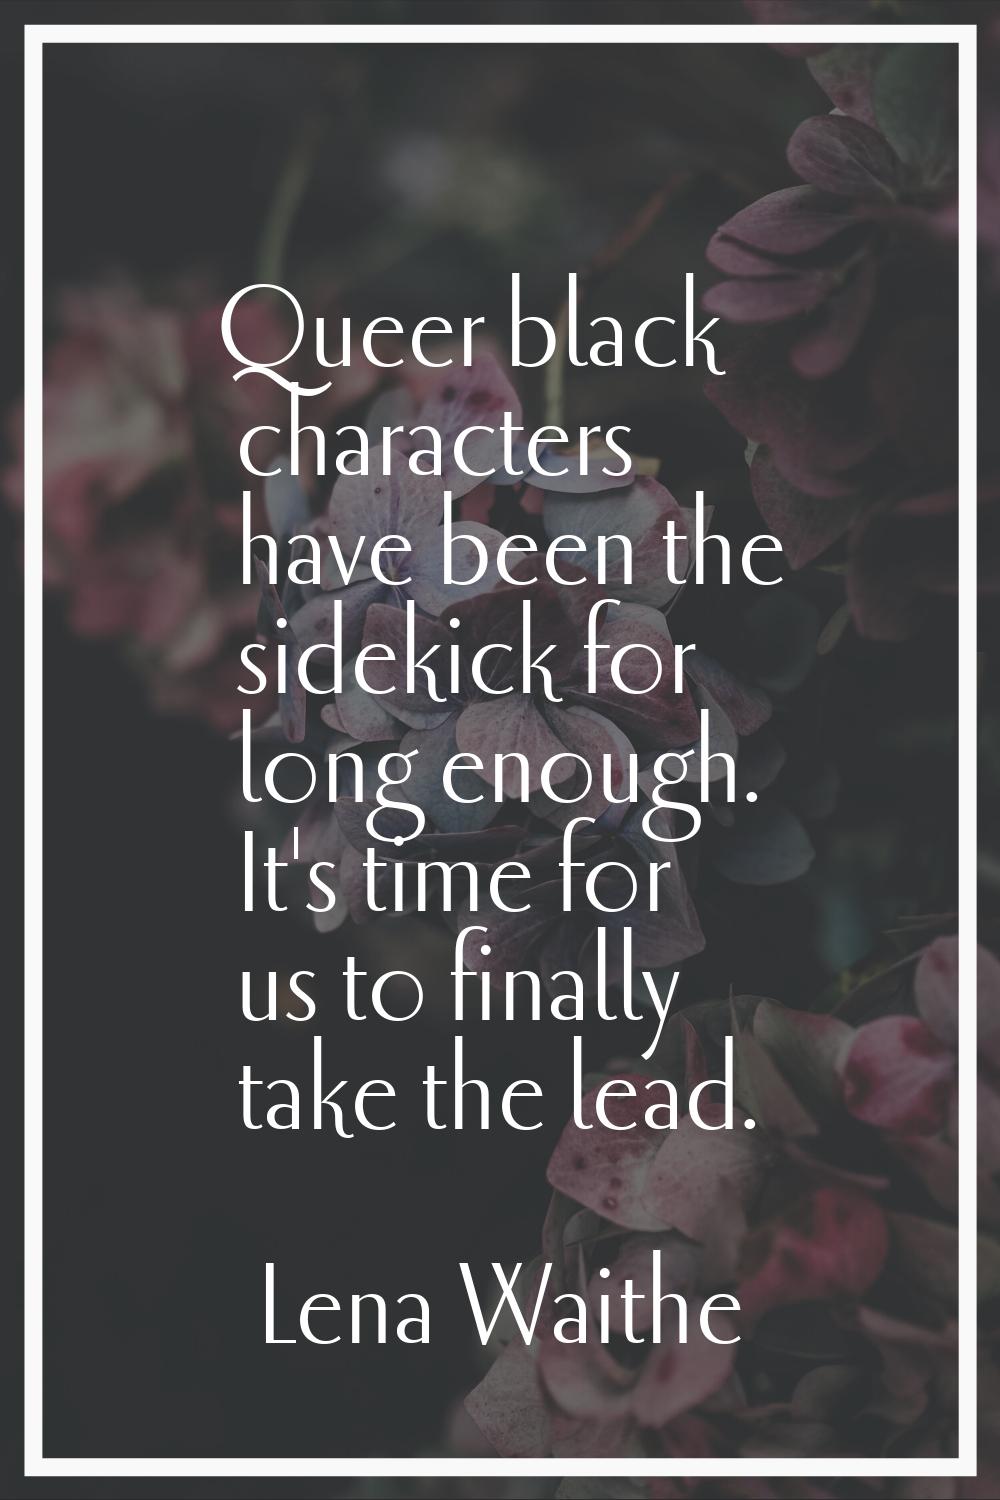 Queer black characters have been the sidekick for long enough. It's time for us to finally take the